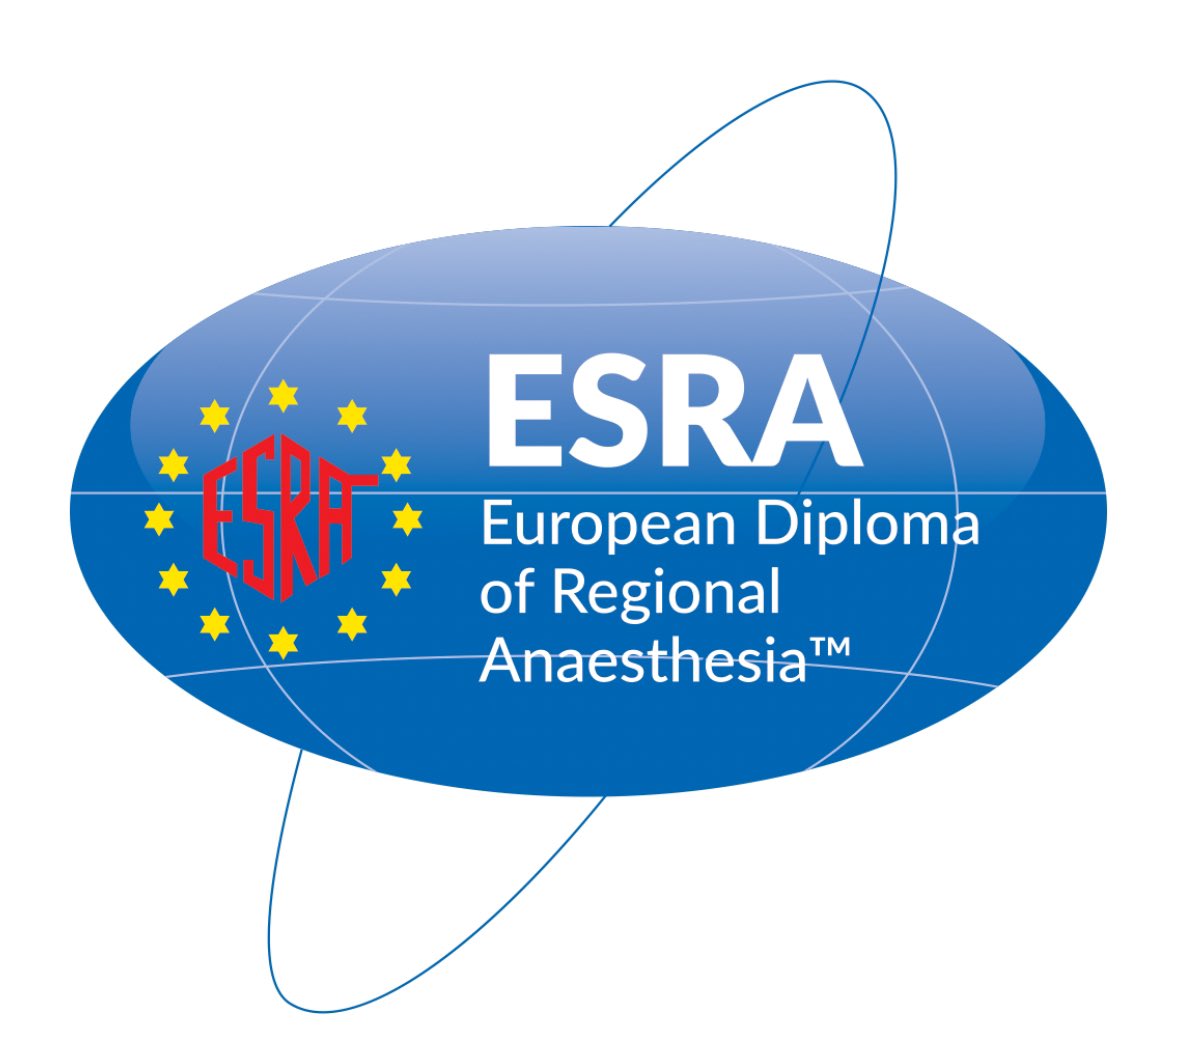 Congratulations to all successful candidates who passed the @ESRA_Society #EDRA Part 1 exam. The results were just released. All the hard work and preparations were finally worth it as almost 82% of the candidates successfully passed the exam 💪💪💪 @docmorne @oyacok